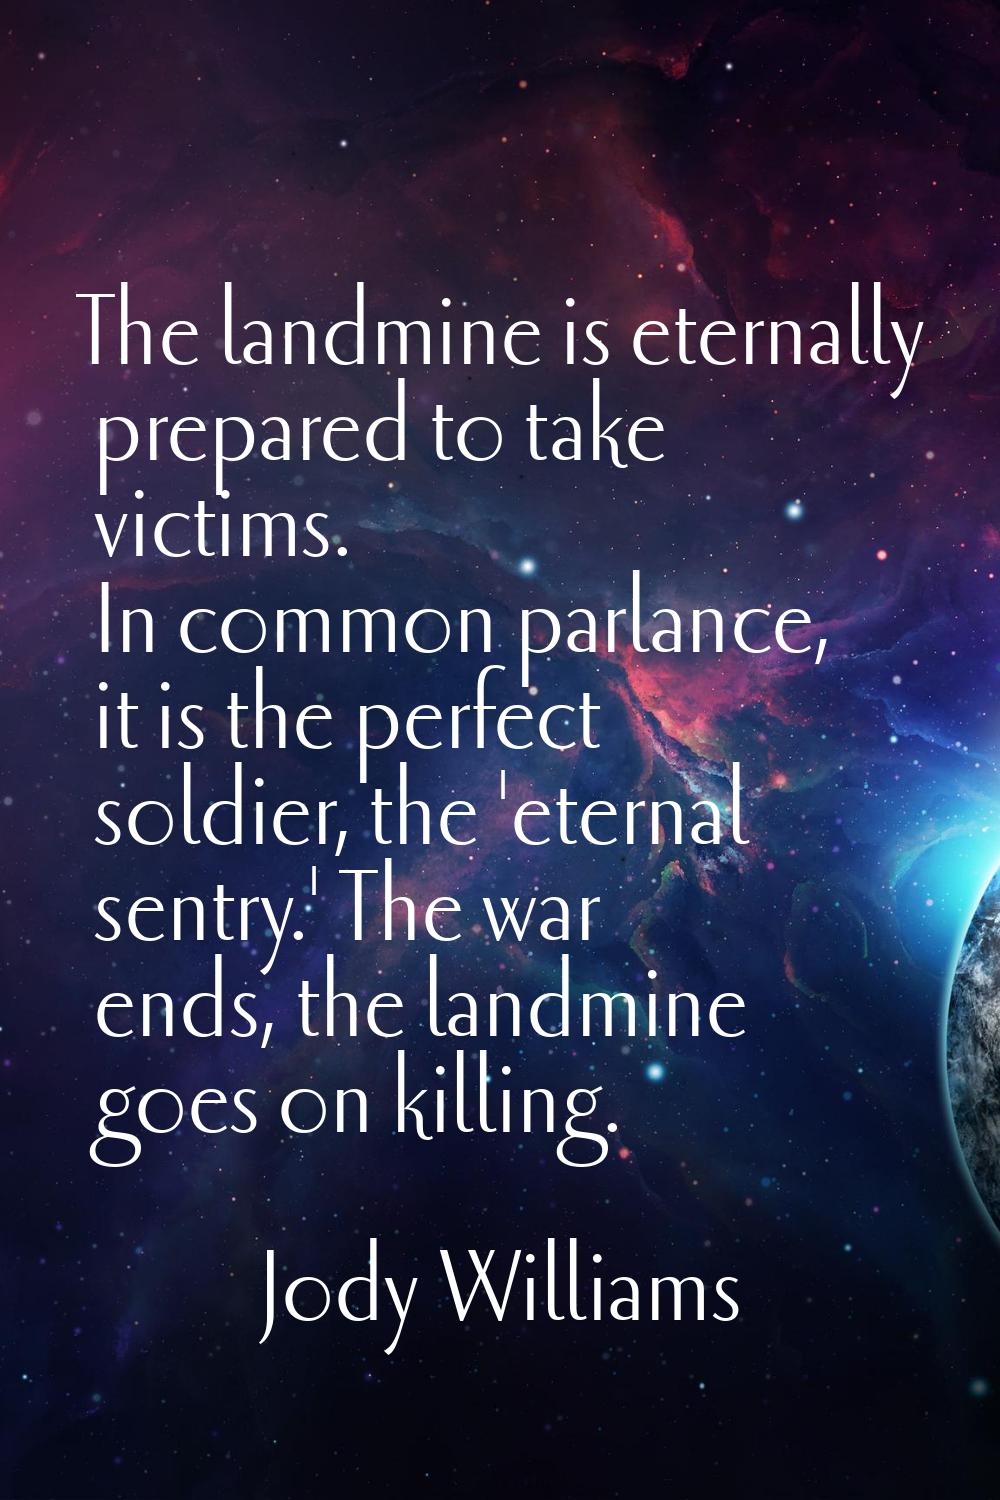 The landmine is eternally prepared to take victims. In common parlance, it is the perfect soldier, 